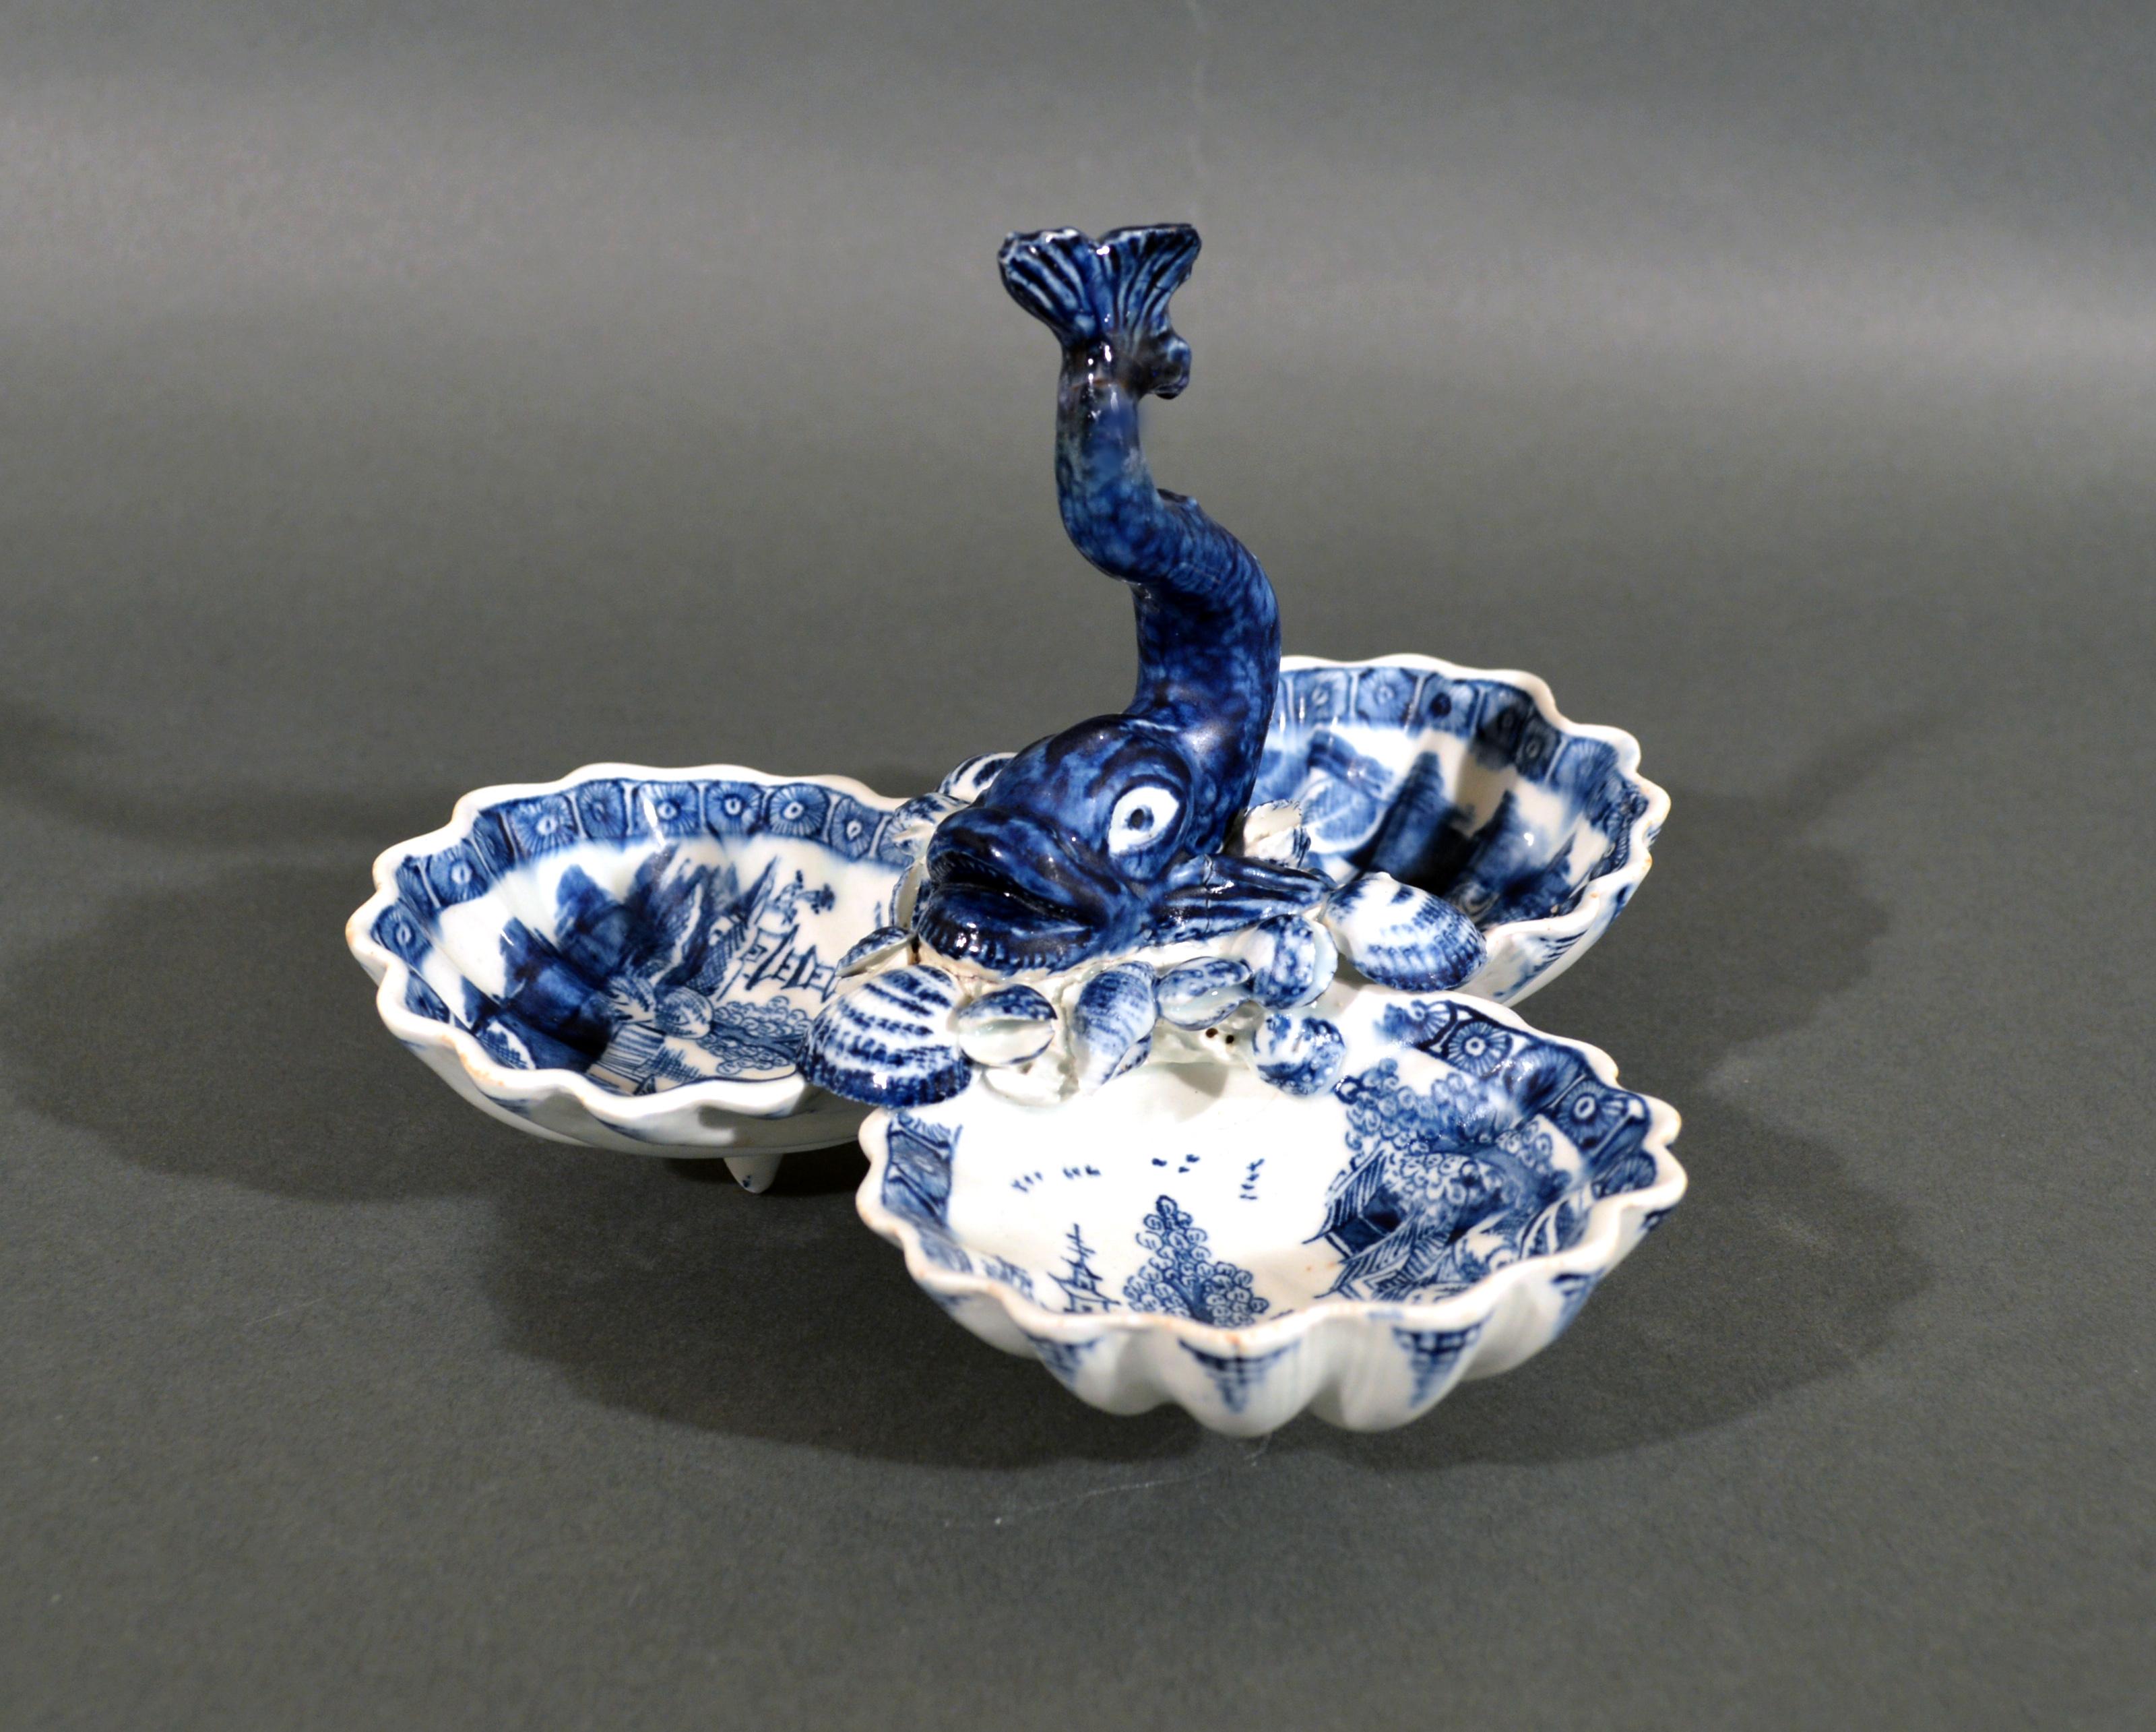 English porcelain dolphin sweetmeat or pickle stand,
Bow factory,
1752-1755

The English soft-paste porcelain sweetmeat stand or pickle stand is painted in underglaze blue and comprising of three shell-shaped dishes, each raised on a conical peg